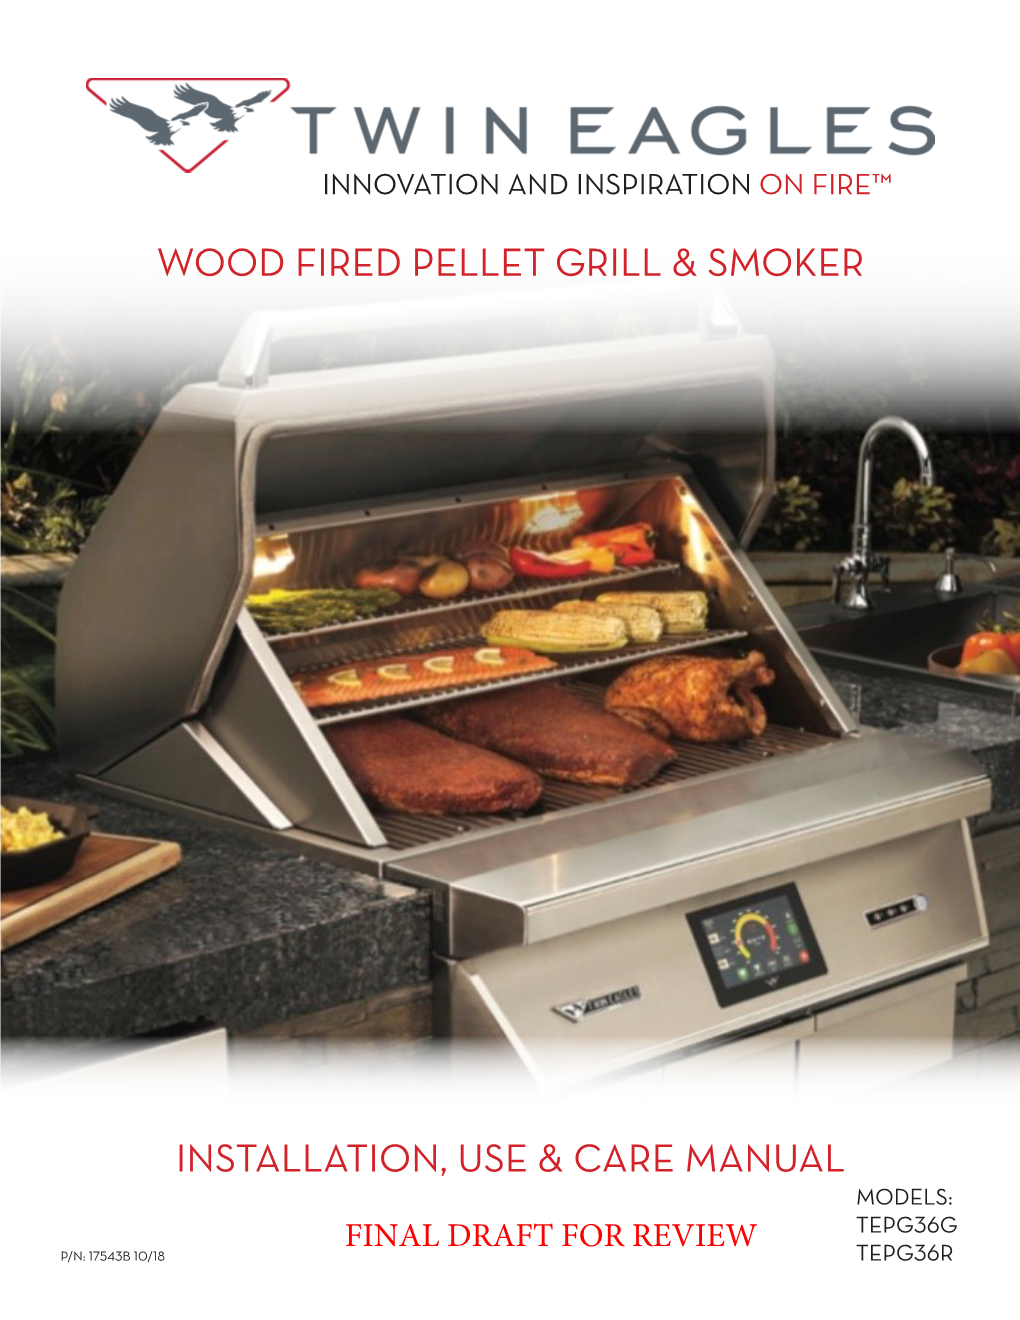 Installation, Use & Care Manual Wood Fired Pellet Grill & Smoker